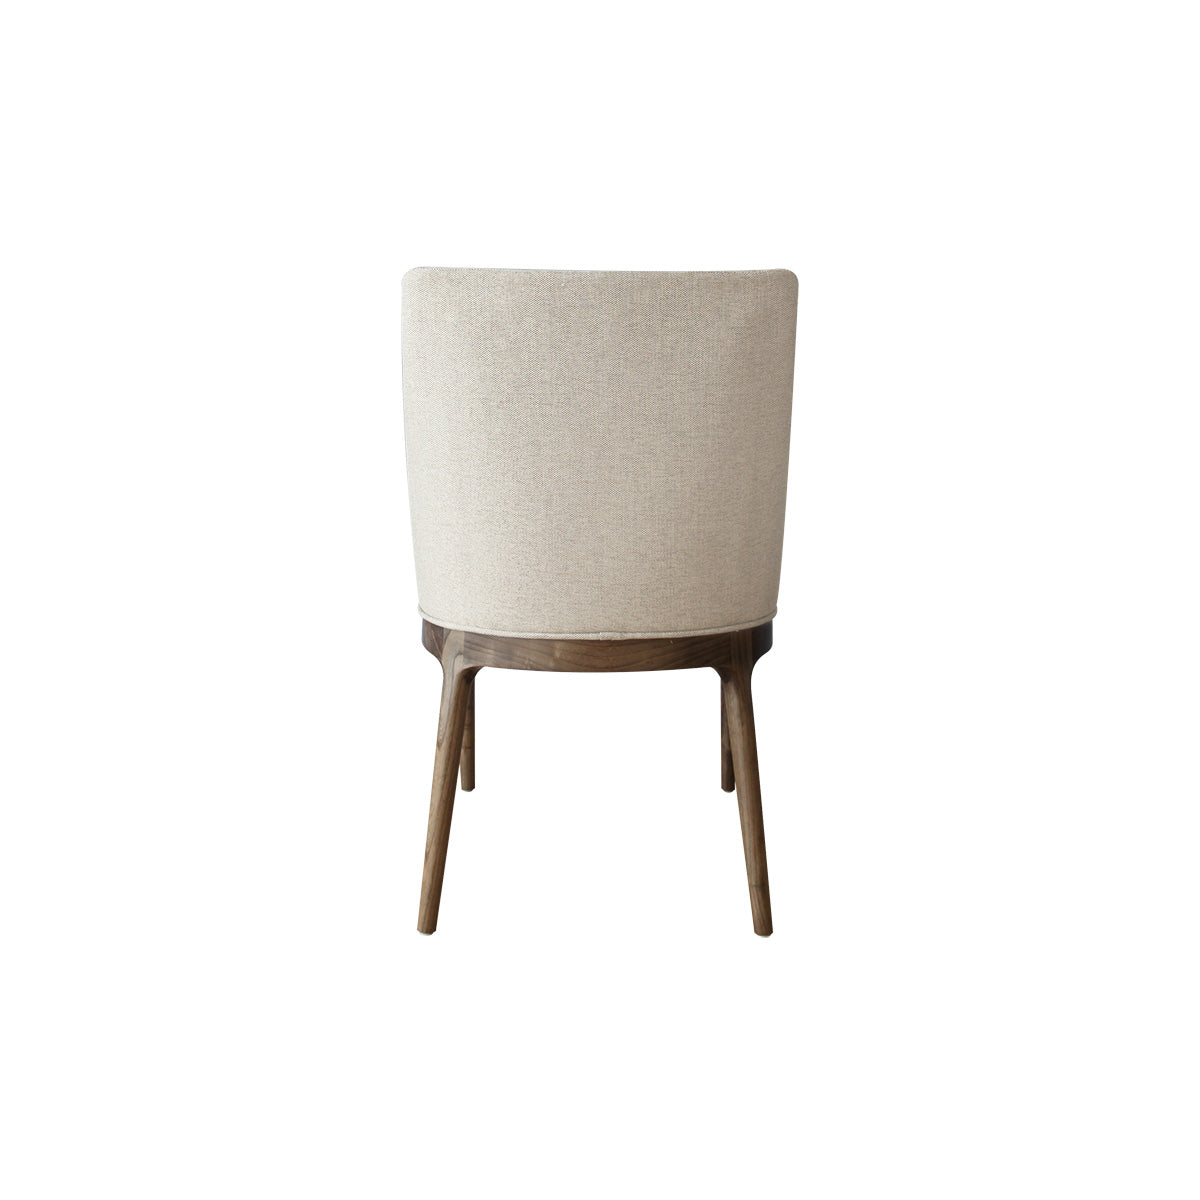 contemporary dining chair with straight wooden legs and a low backrest side view